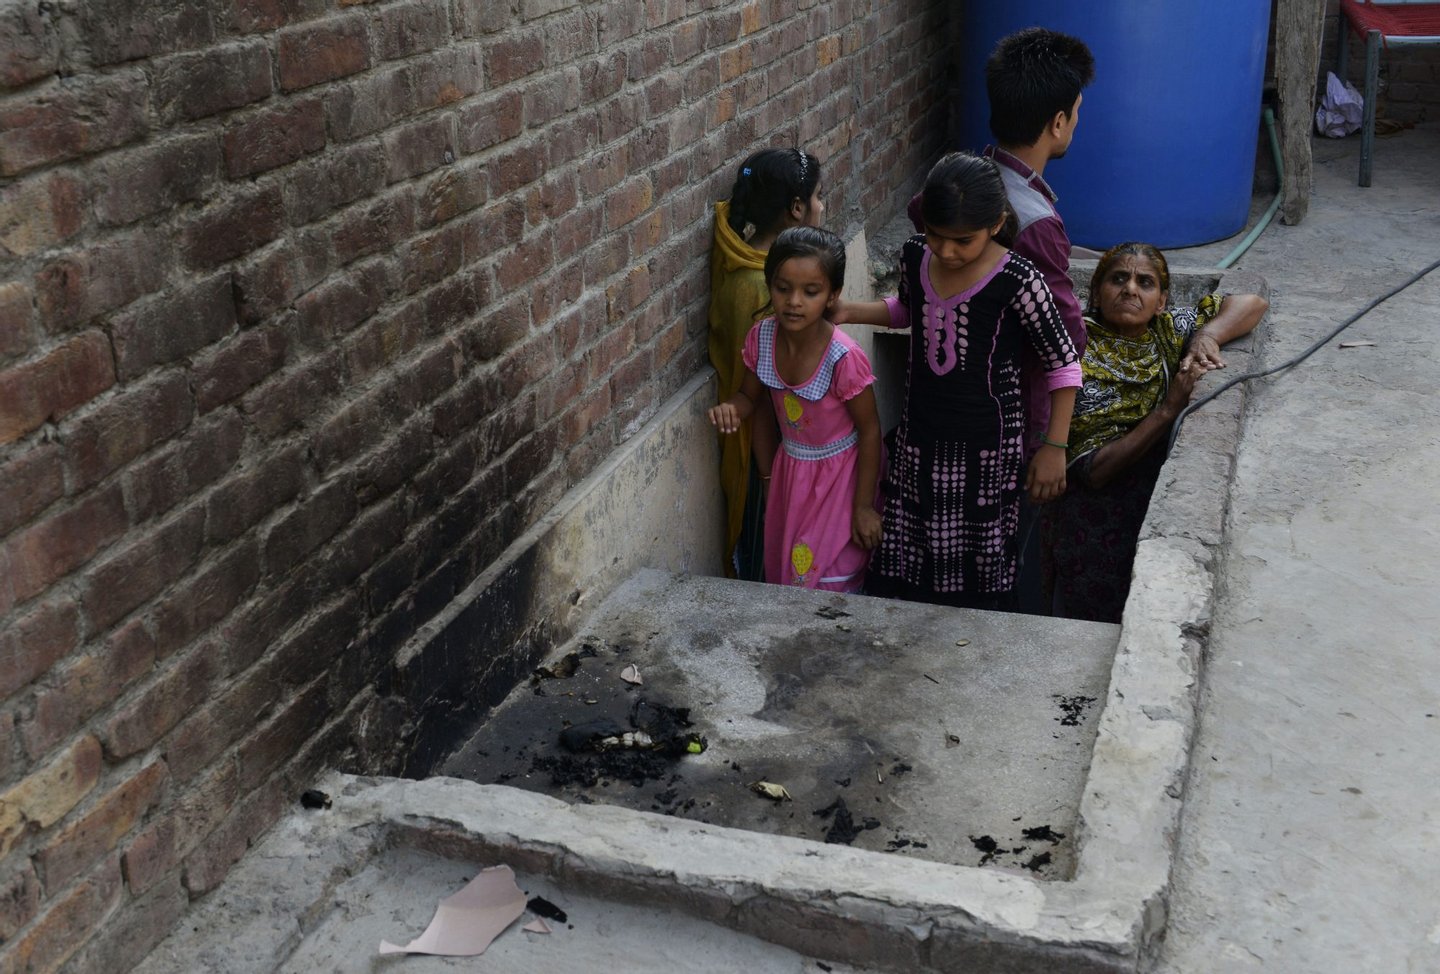 Pakistani residents stand at the site where a teenager was burnt alive by her mother in Lahore on June 8, 2016. A Pakistani mother on June 8 burnt her 16-year-old daughter alive for marrying a man of her own choice, before running out her street to tell neighbours she had killed the teen for bringing shame to the family. It was the third so-called "honour killing" in the South Asian country in as many months, and a rare example of the crime being carried out by a woman. / AFP / ARIF ALI (Photo credit should read ARIF ALI/AFP/Getty Images)